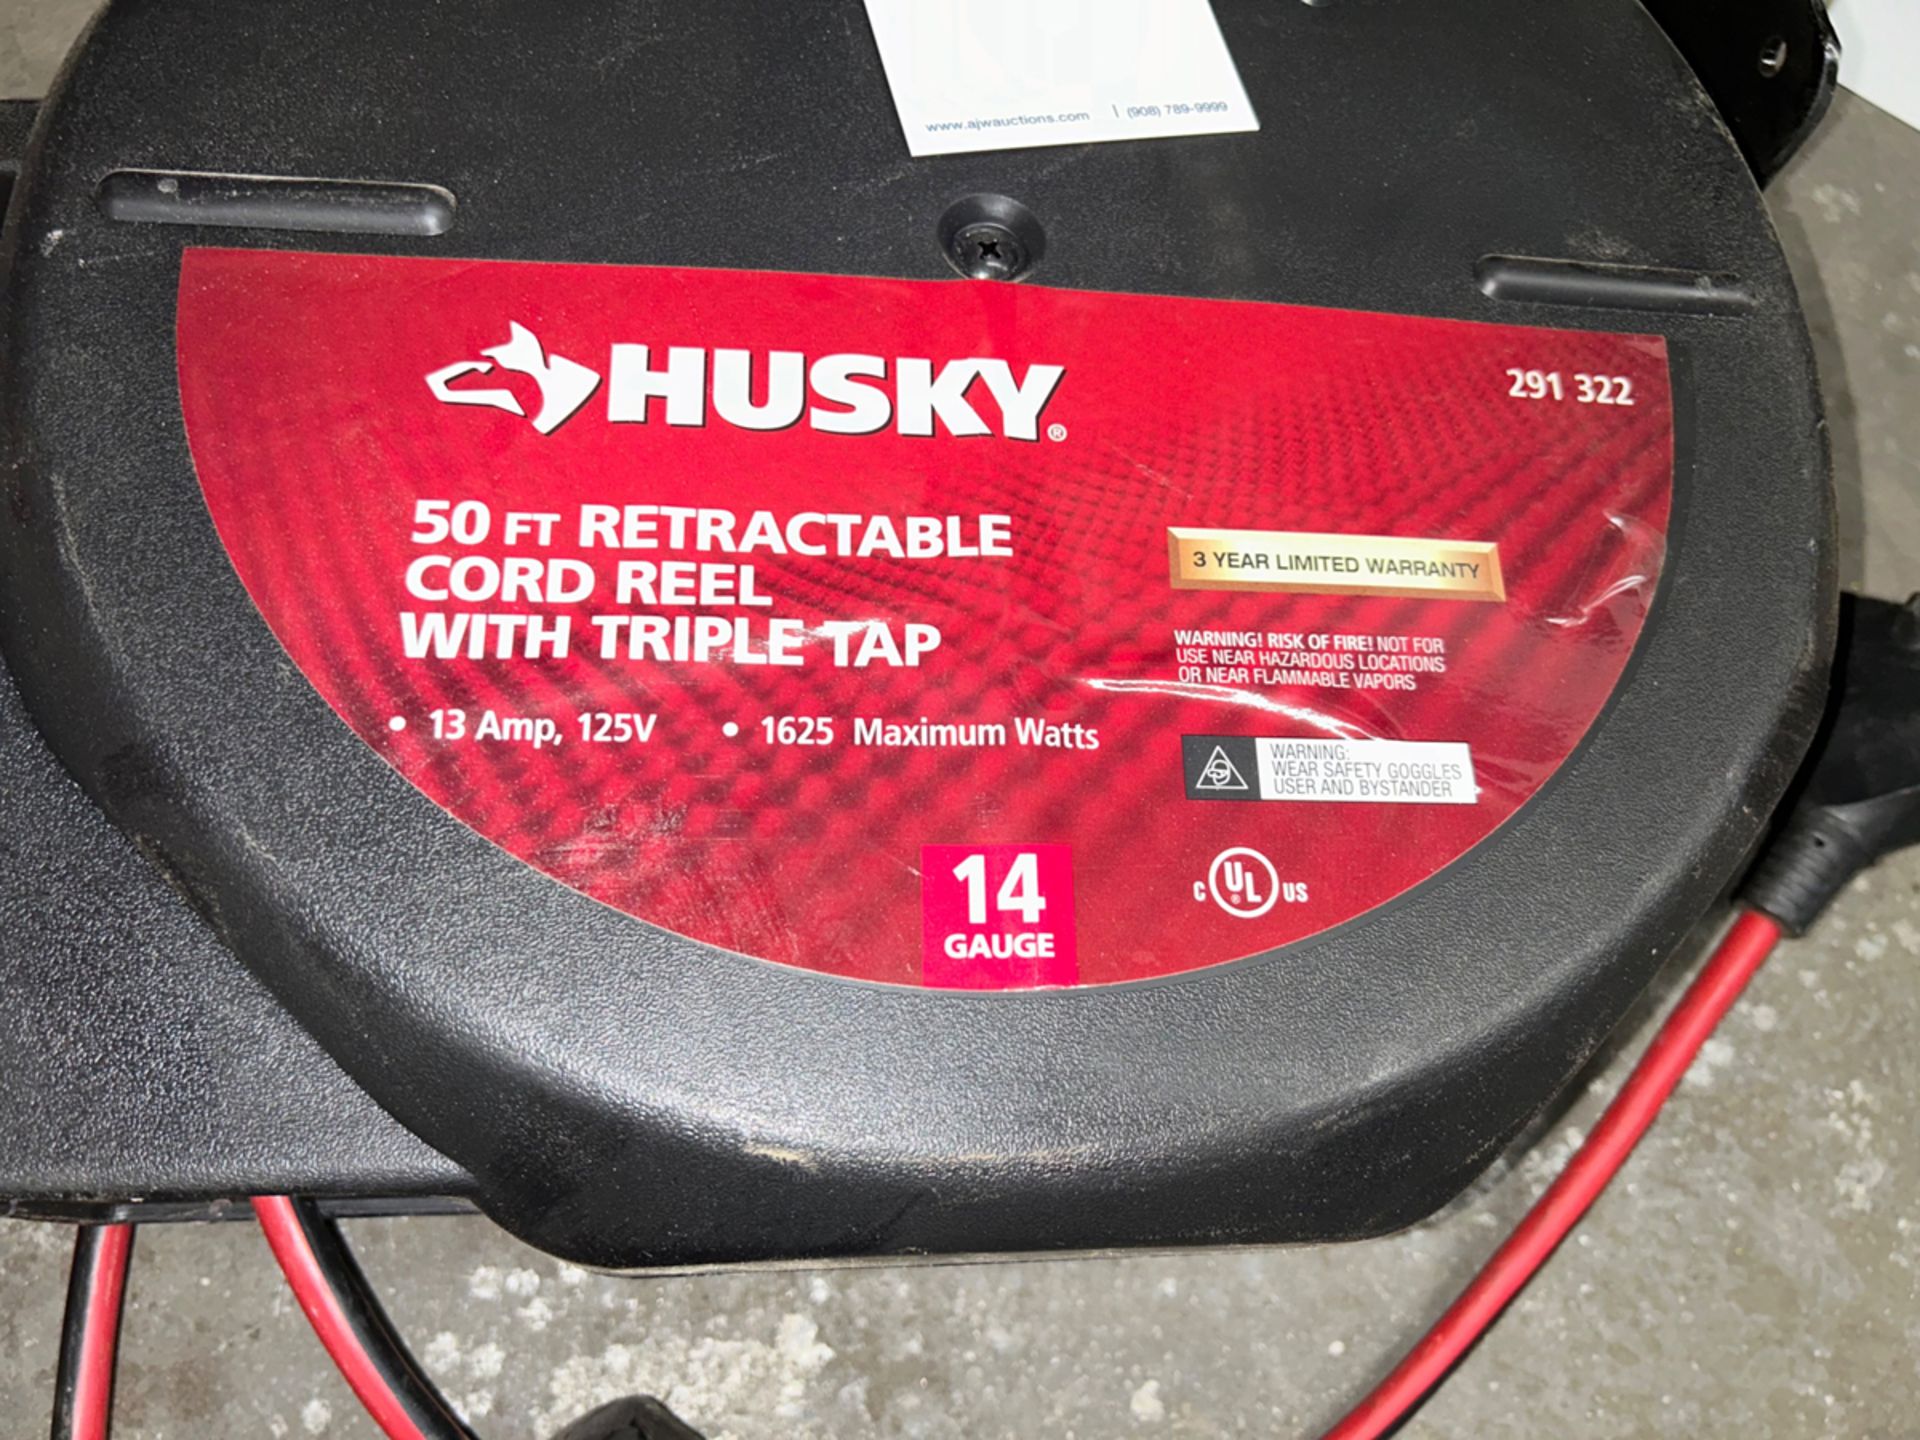 Husky 50' Retractable Cord Reel With Triple Tap - Image 2 of 2